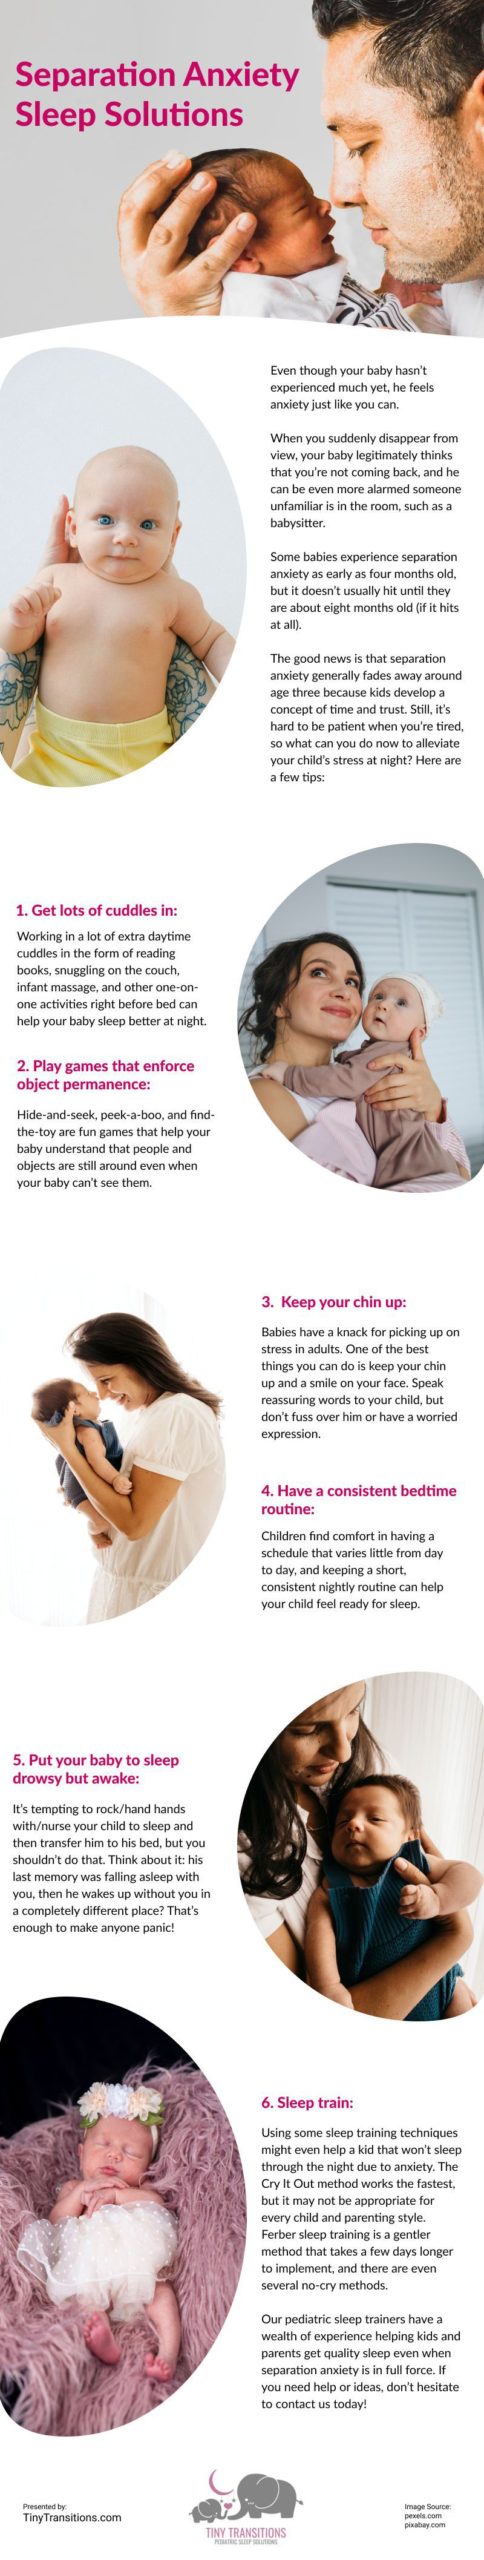 Separation Anxiety Sleep Solutions Infographic